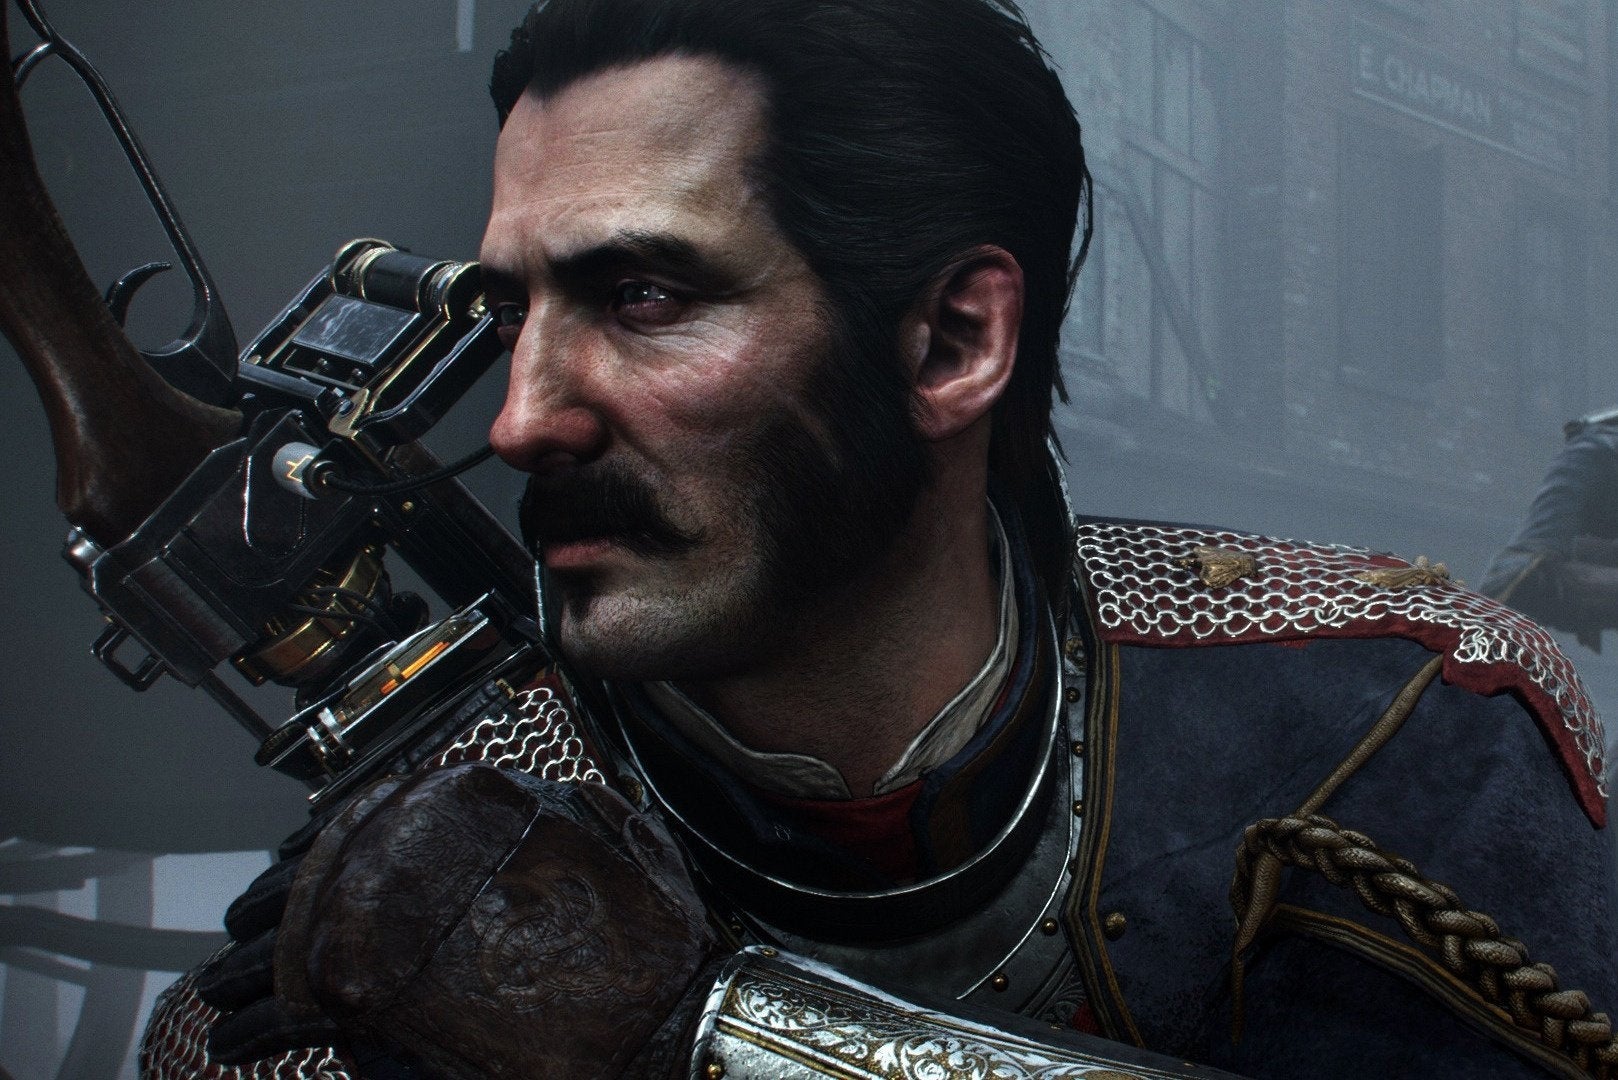 The order: 1886. Игра орден 1886. Order 1886 ps4. The order 1886 Gameplay.